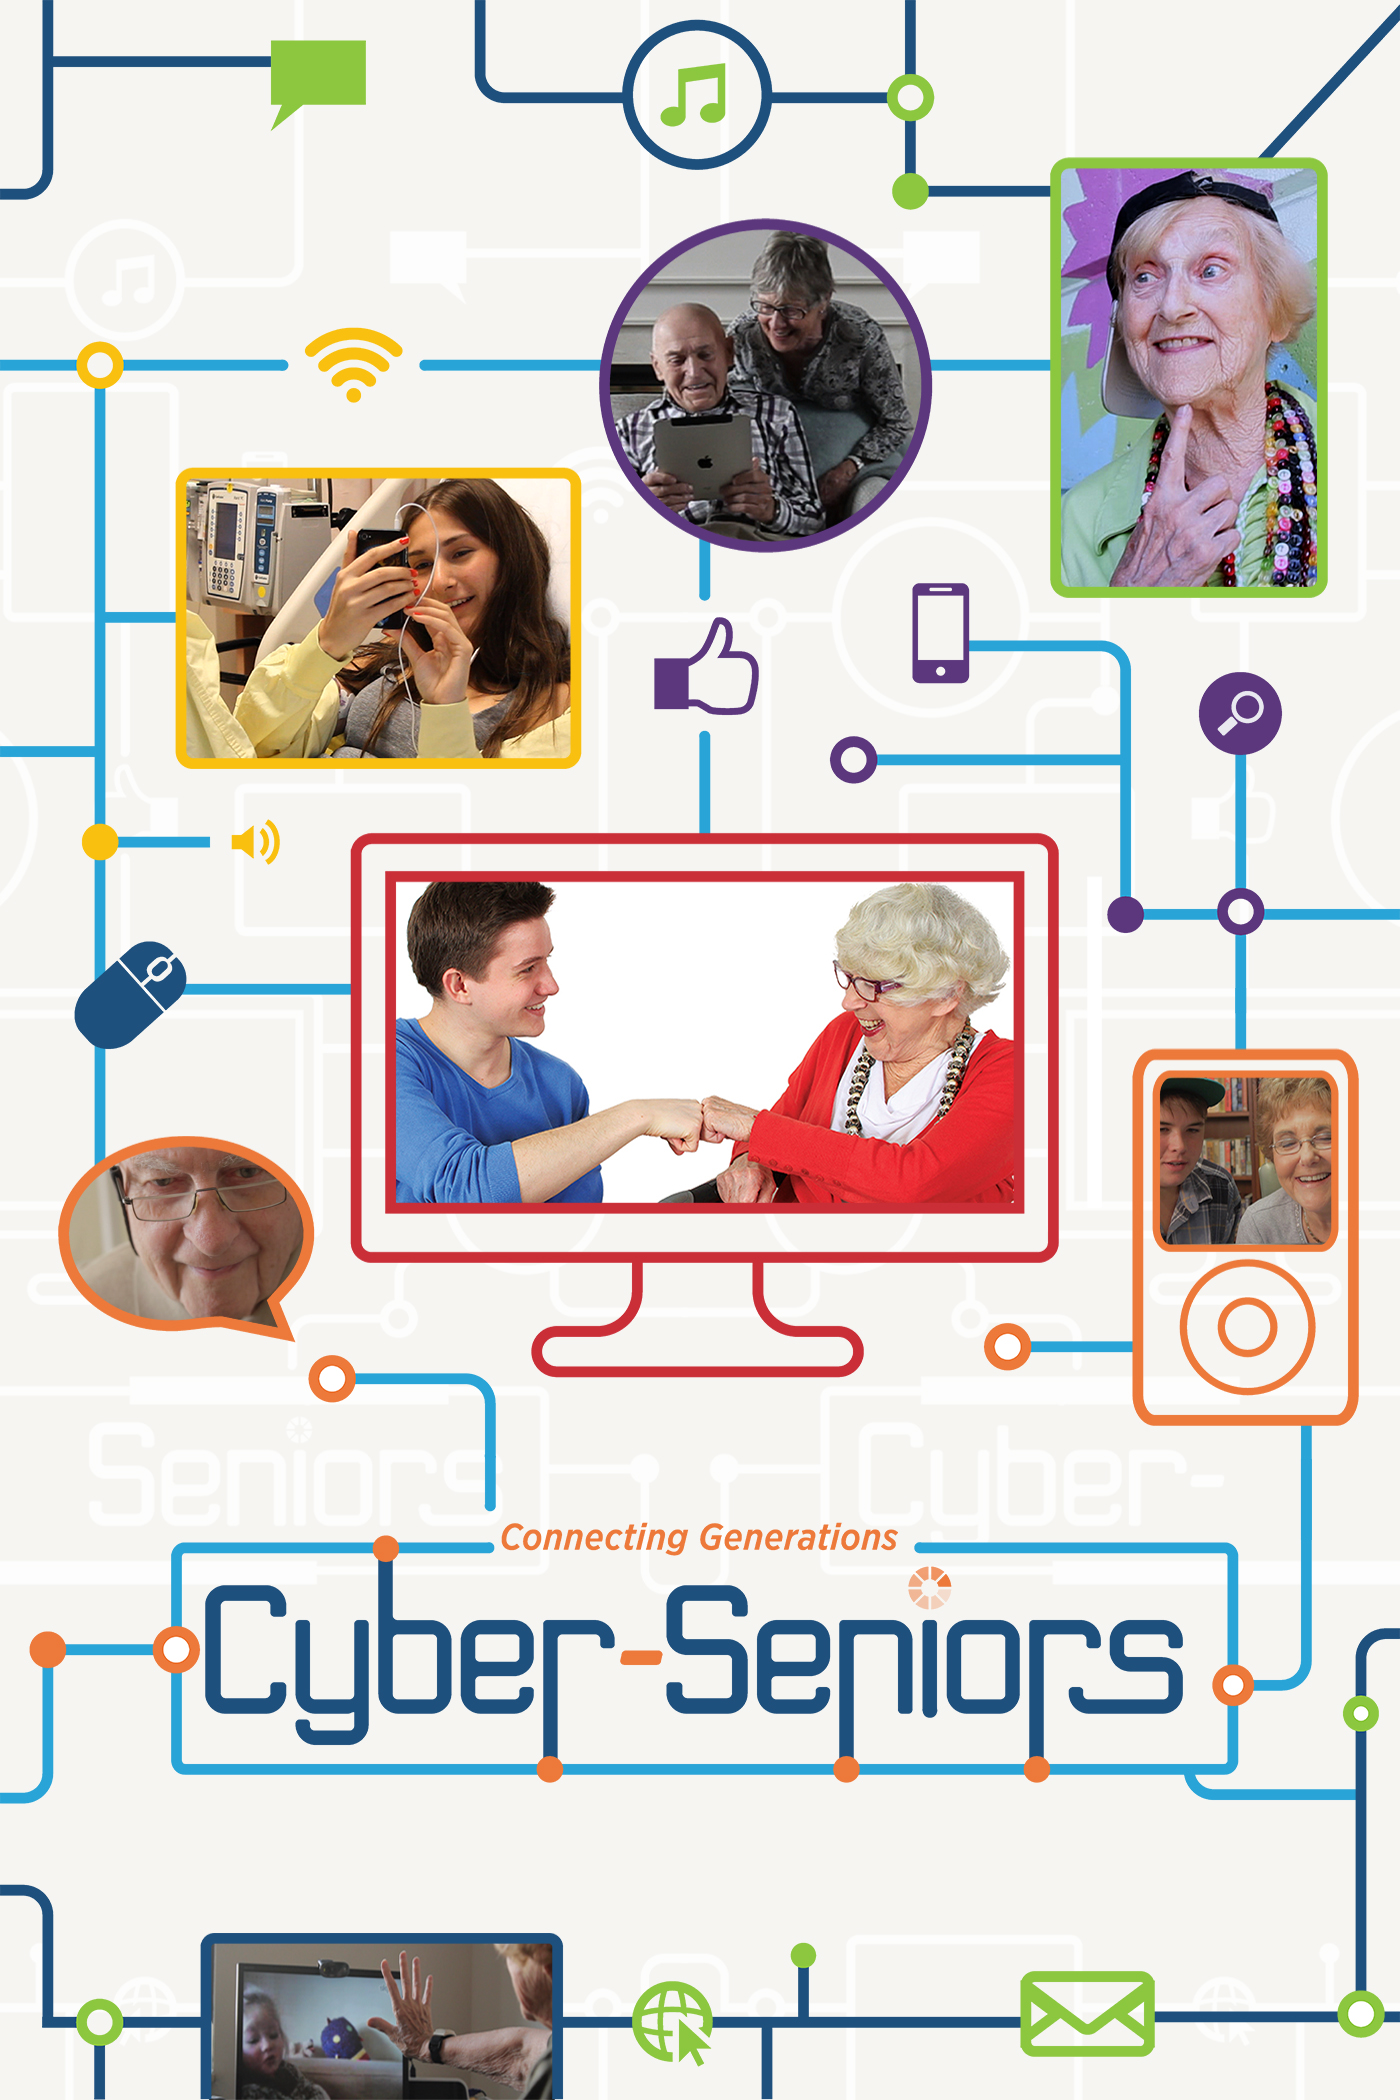 A Labor of Love and the Internet: ‘Cyber-Seniors’